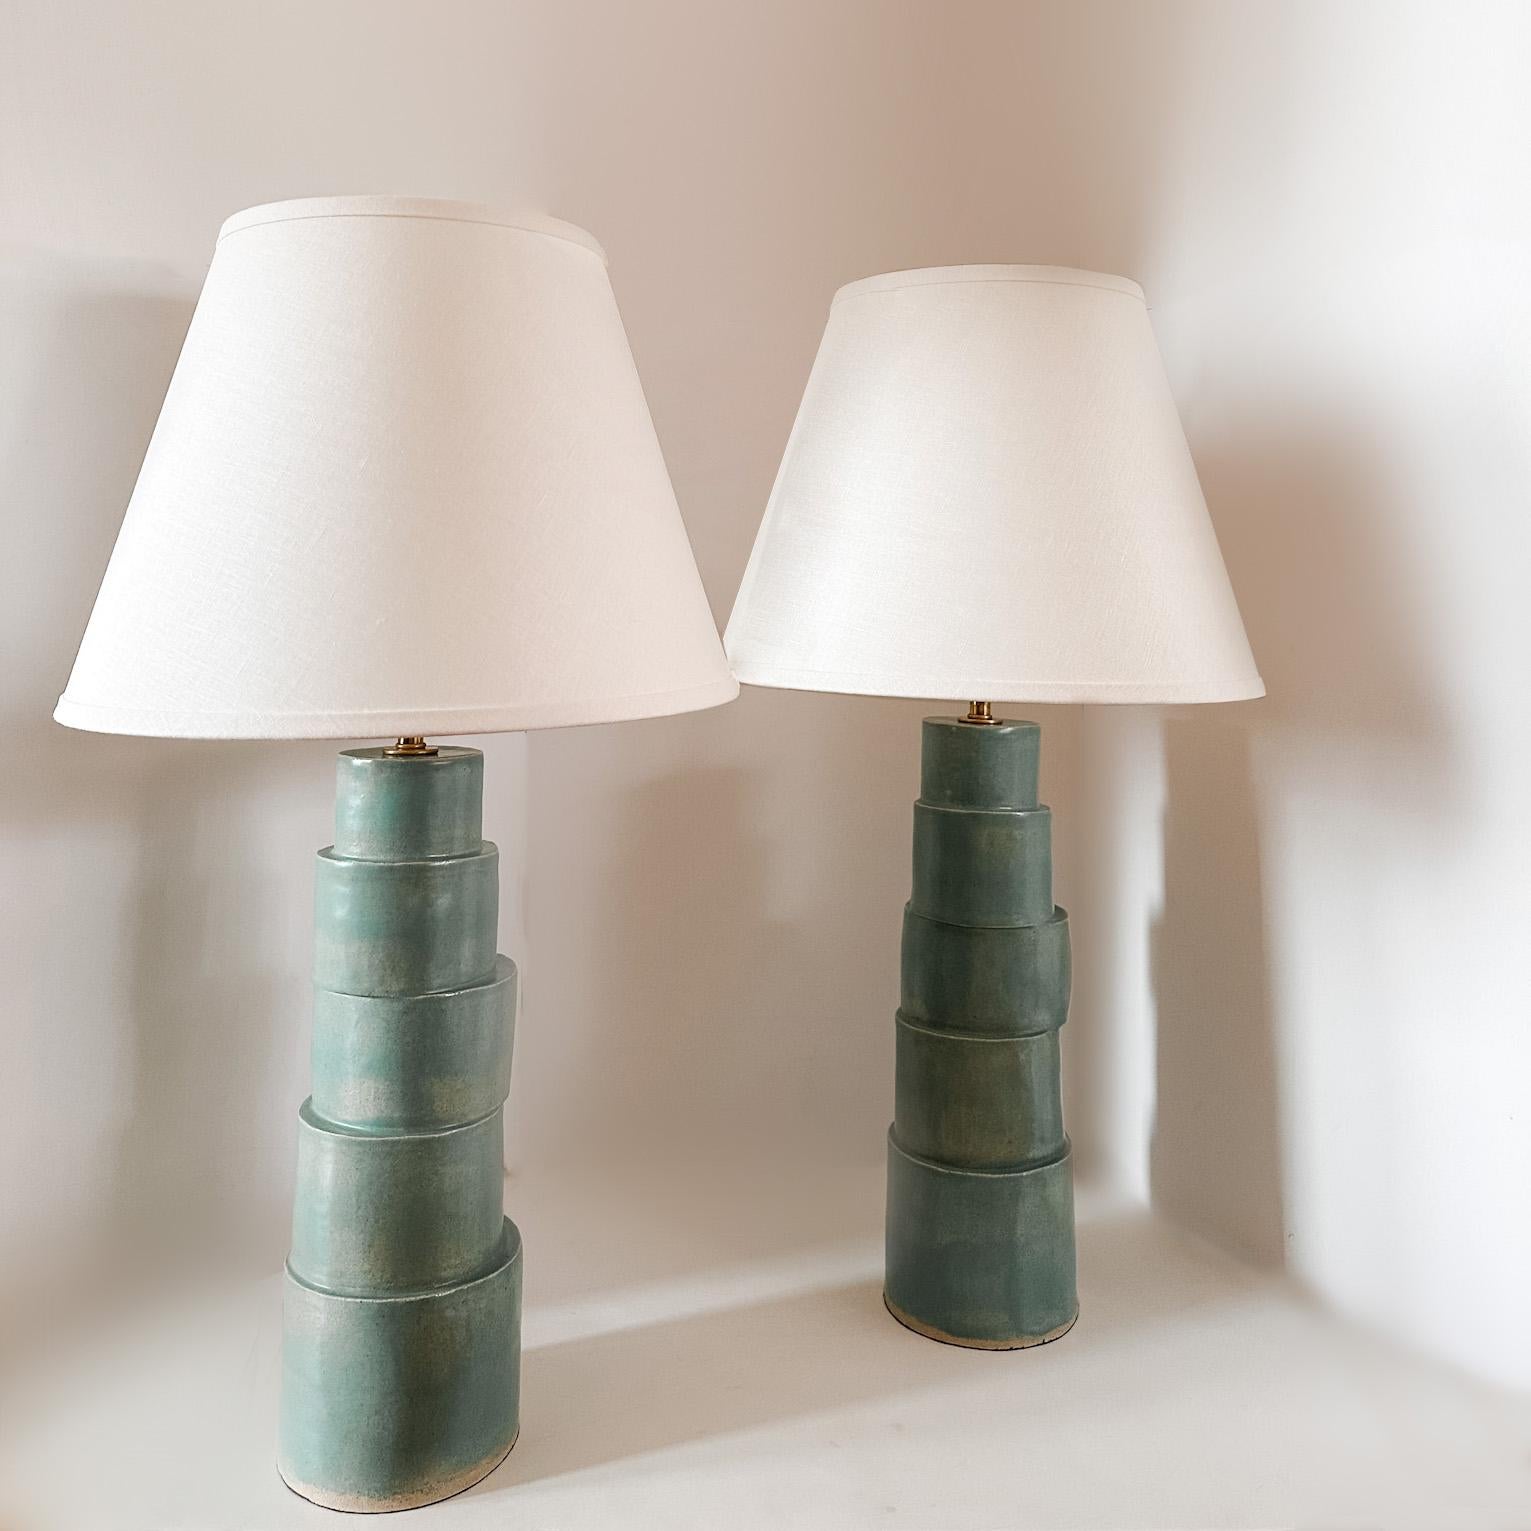 The Stacked column table lamp is handmade in raku clay. These will be glazed in a custom Capri Blue glaze with brass or silver components, silver, gold, or black fabric cord, and an ivory linen shade. The repetitive nature and asymmetrical design